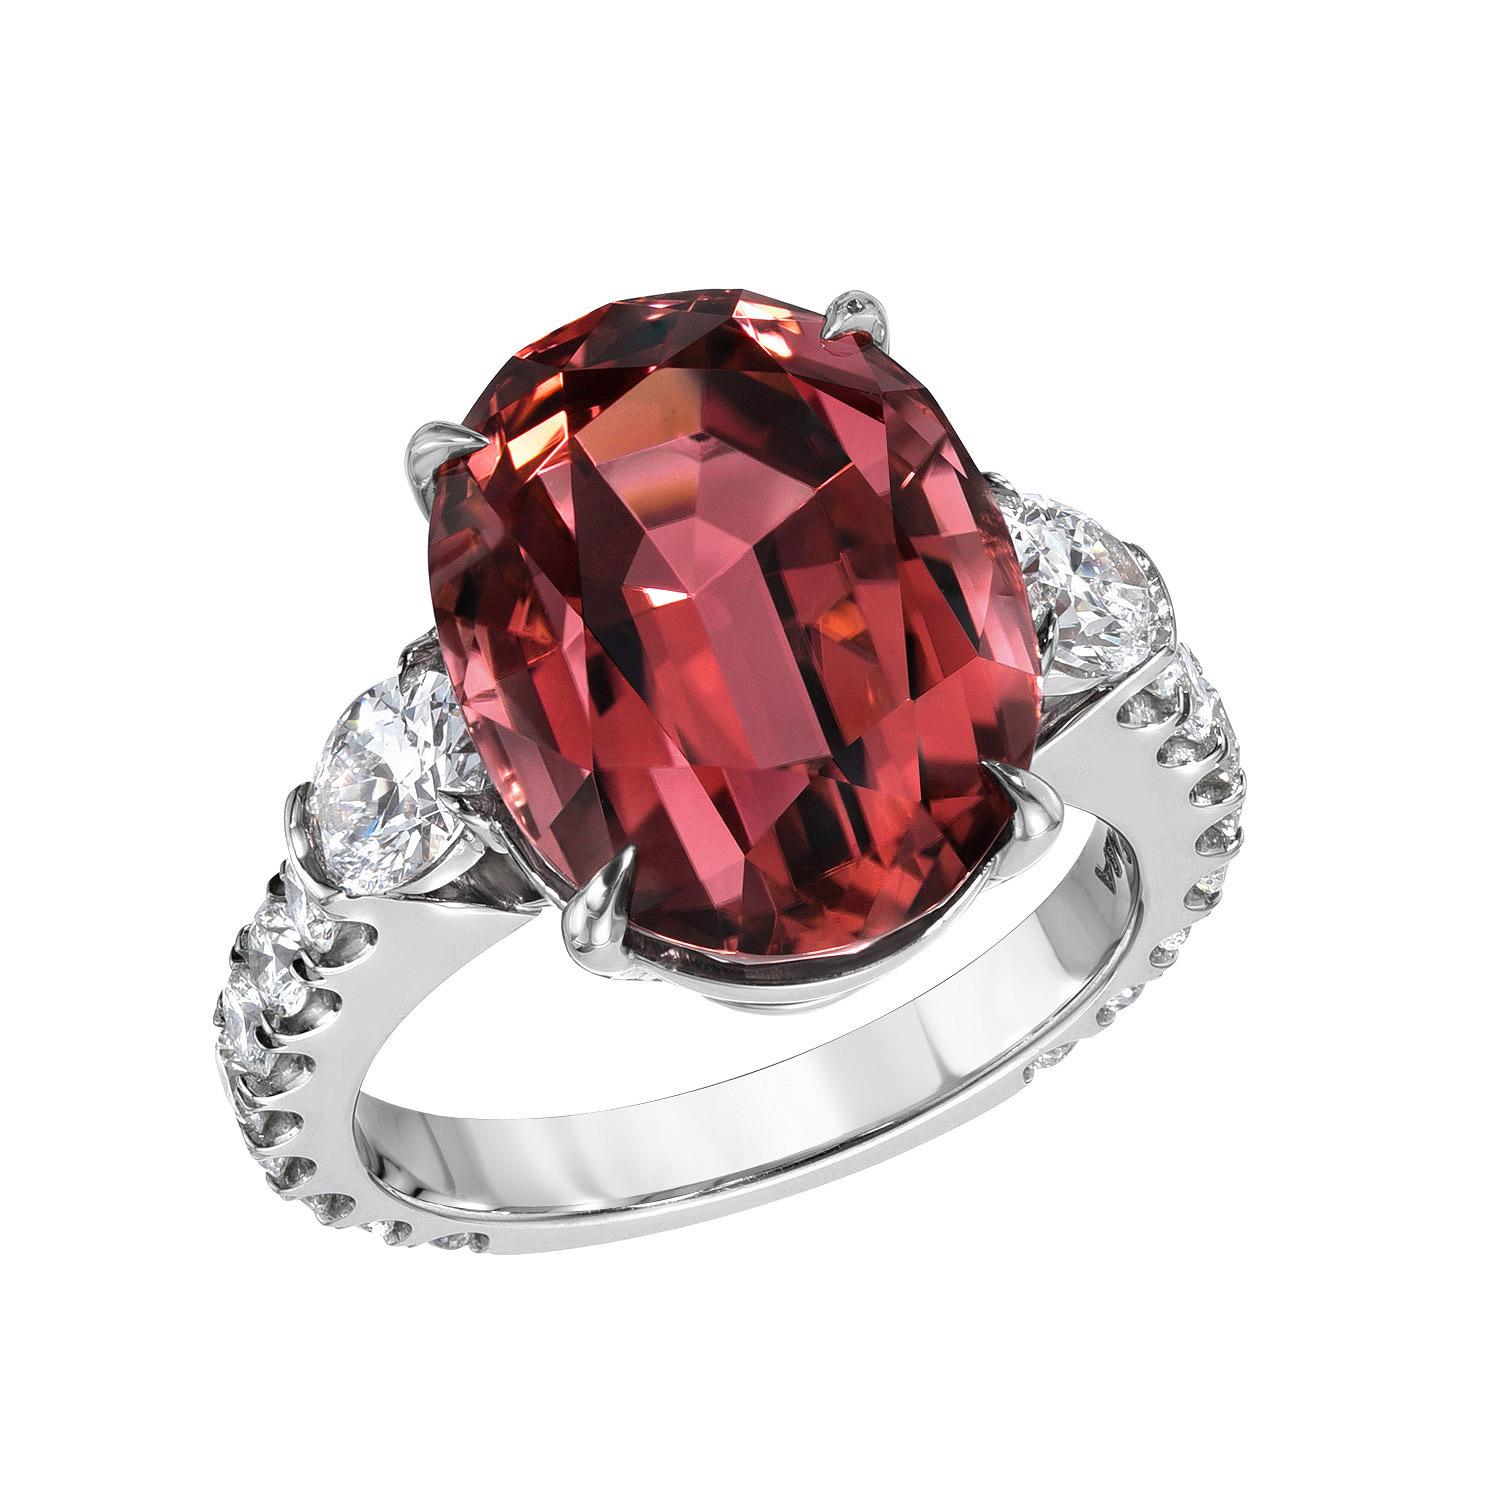 Marvelous 9.55 carat Pink Tourmaline oval platinum ring, decorated with a pair of 0.67 carats, E color/VS2 clarity, oval diamonds, and a total of 0.77 carats, round brilliant collection diamonds.
Size 6. Re-sizing is complimentary upon